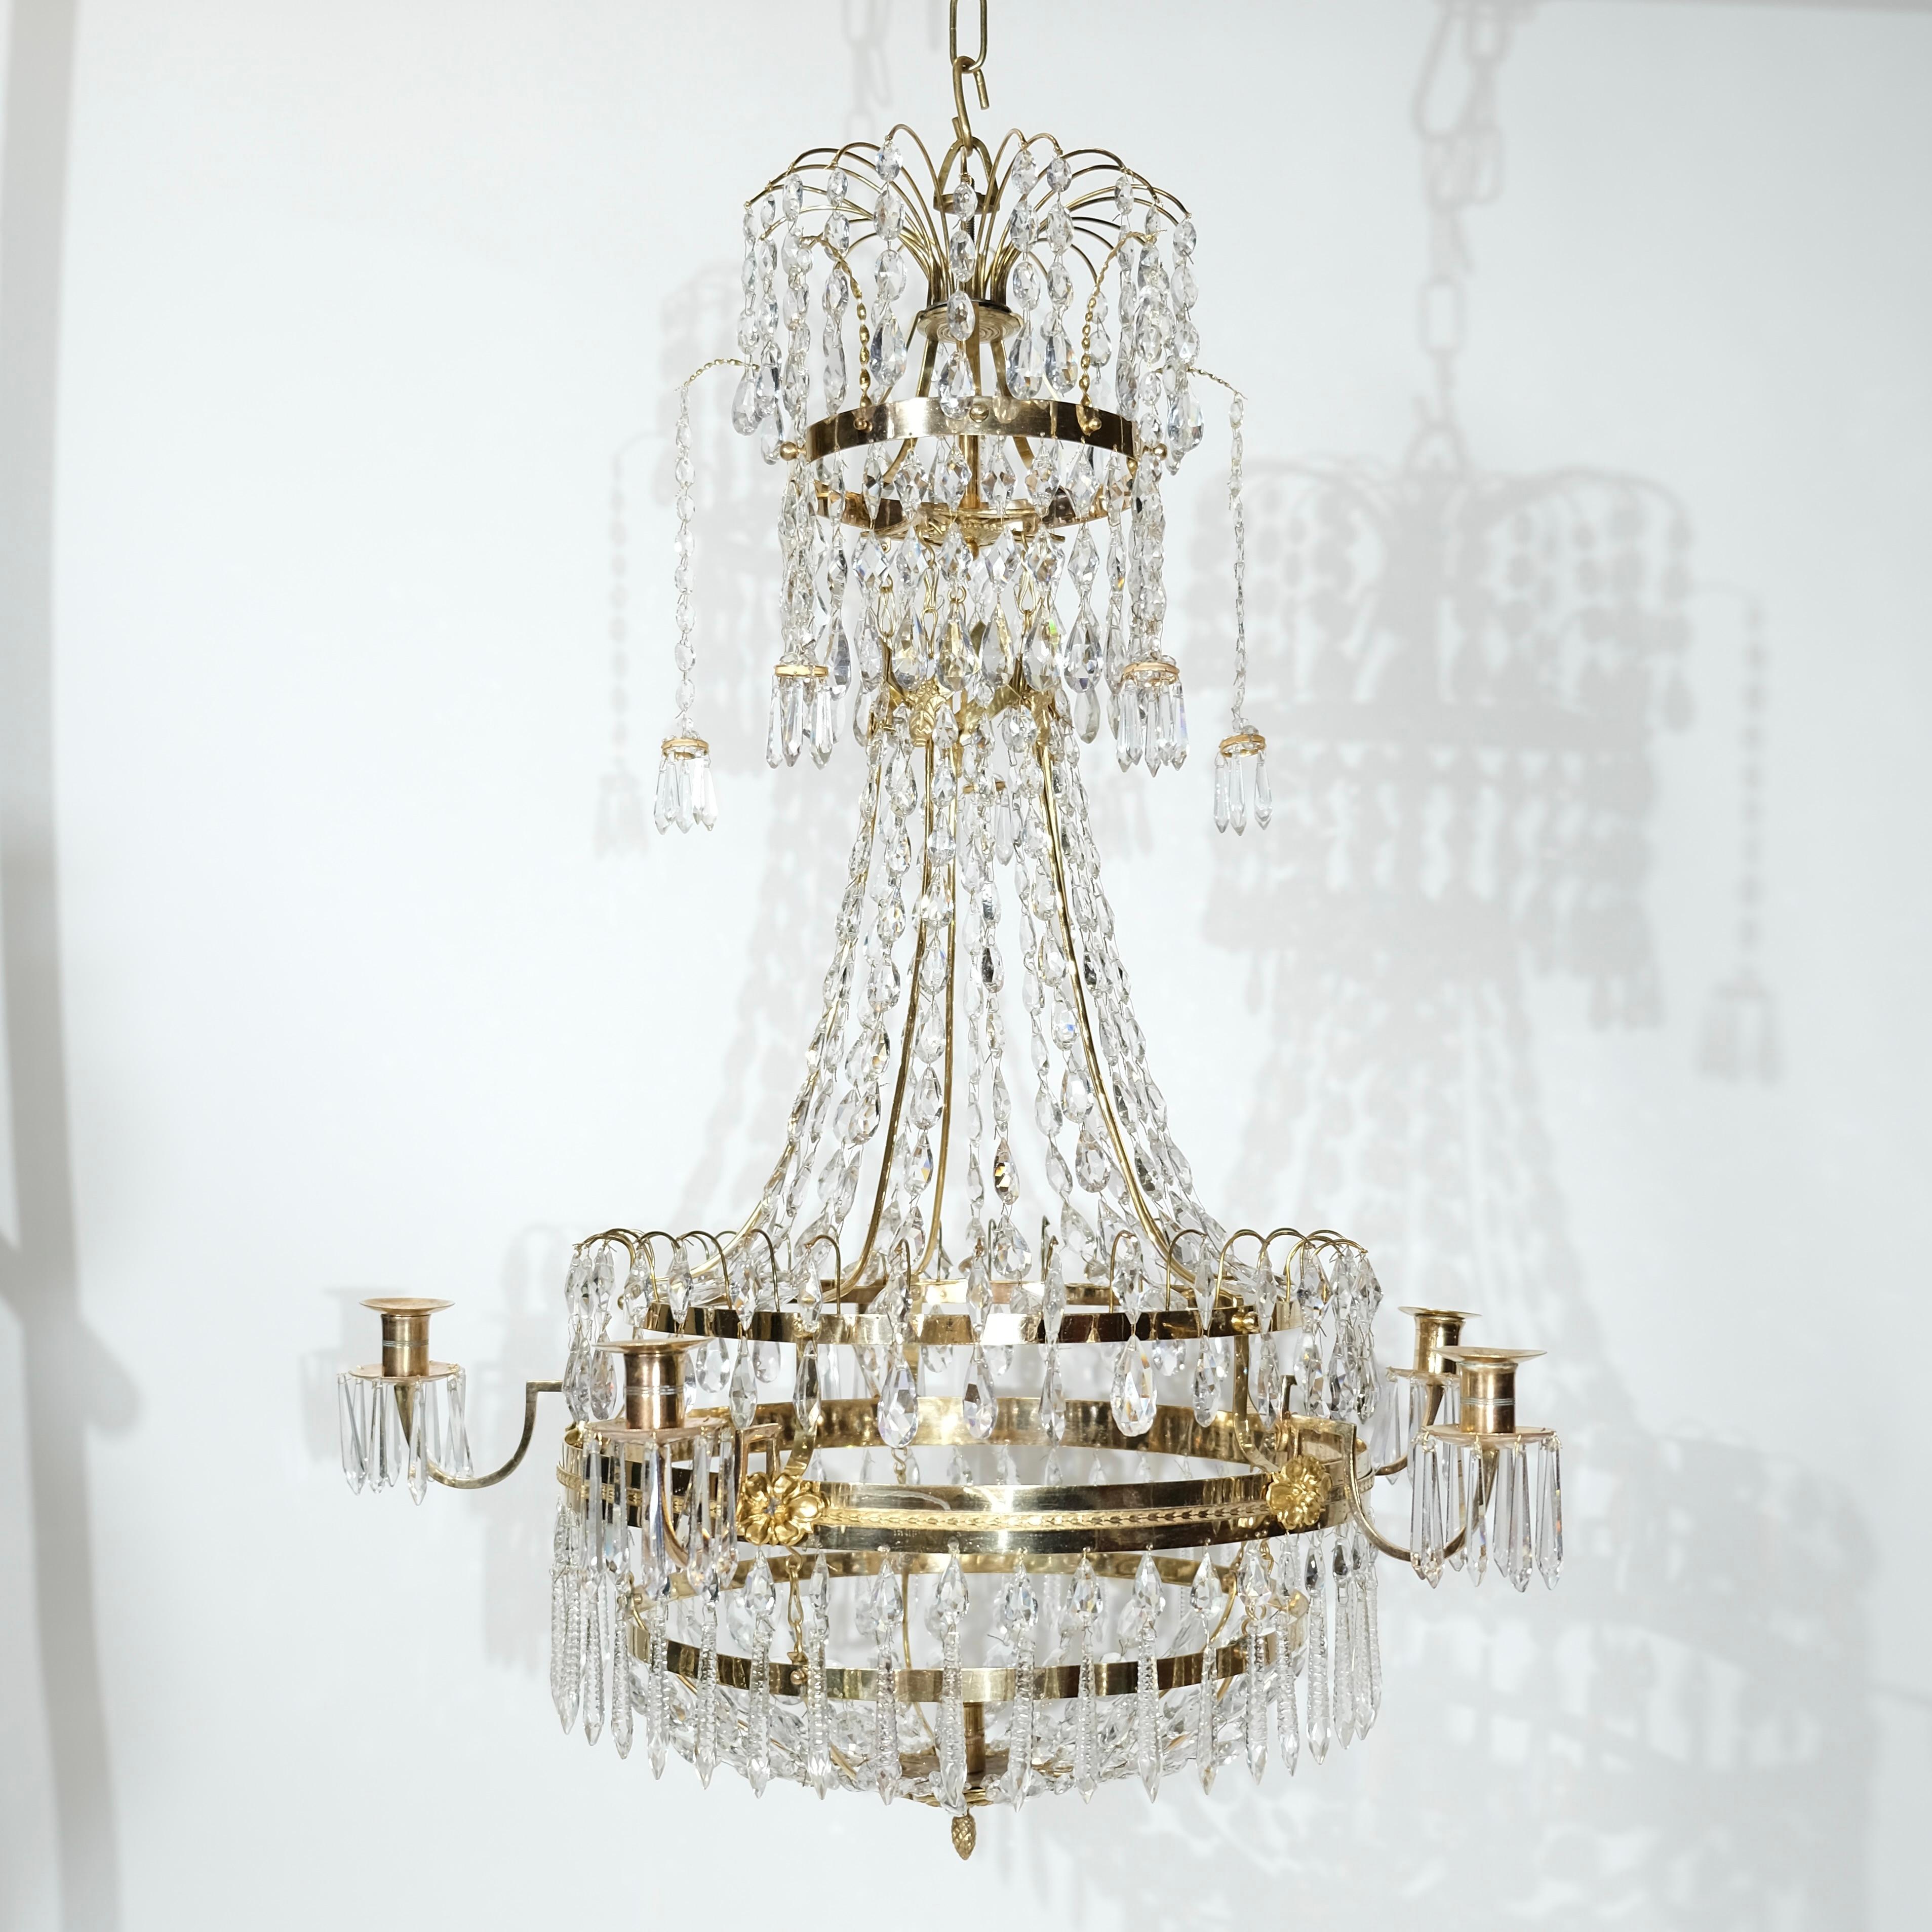 A rare Swedish Gustavian chandelier made around 1810 by Swedens foremost chandelier maker during the Gustavian era, Carl Henric Brolin. He is one of only two chandelier makers that signed their works.
This chandelier is made of gilt brass and bronze